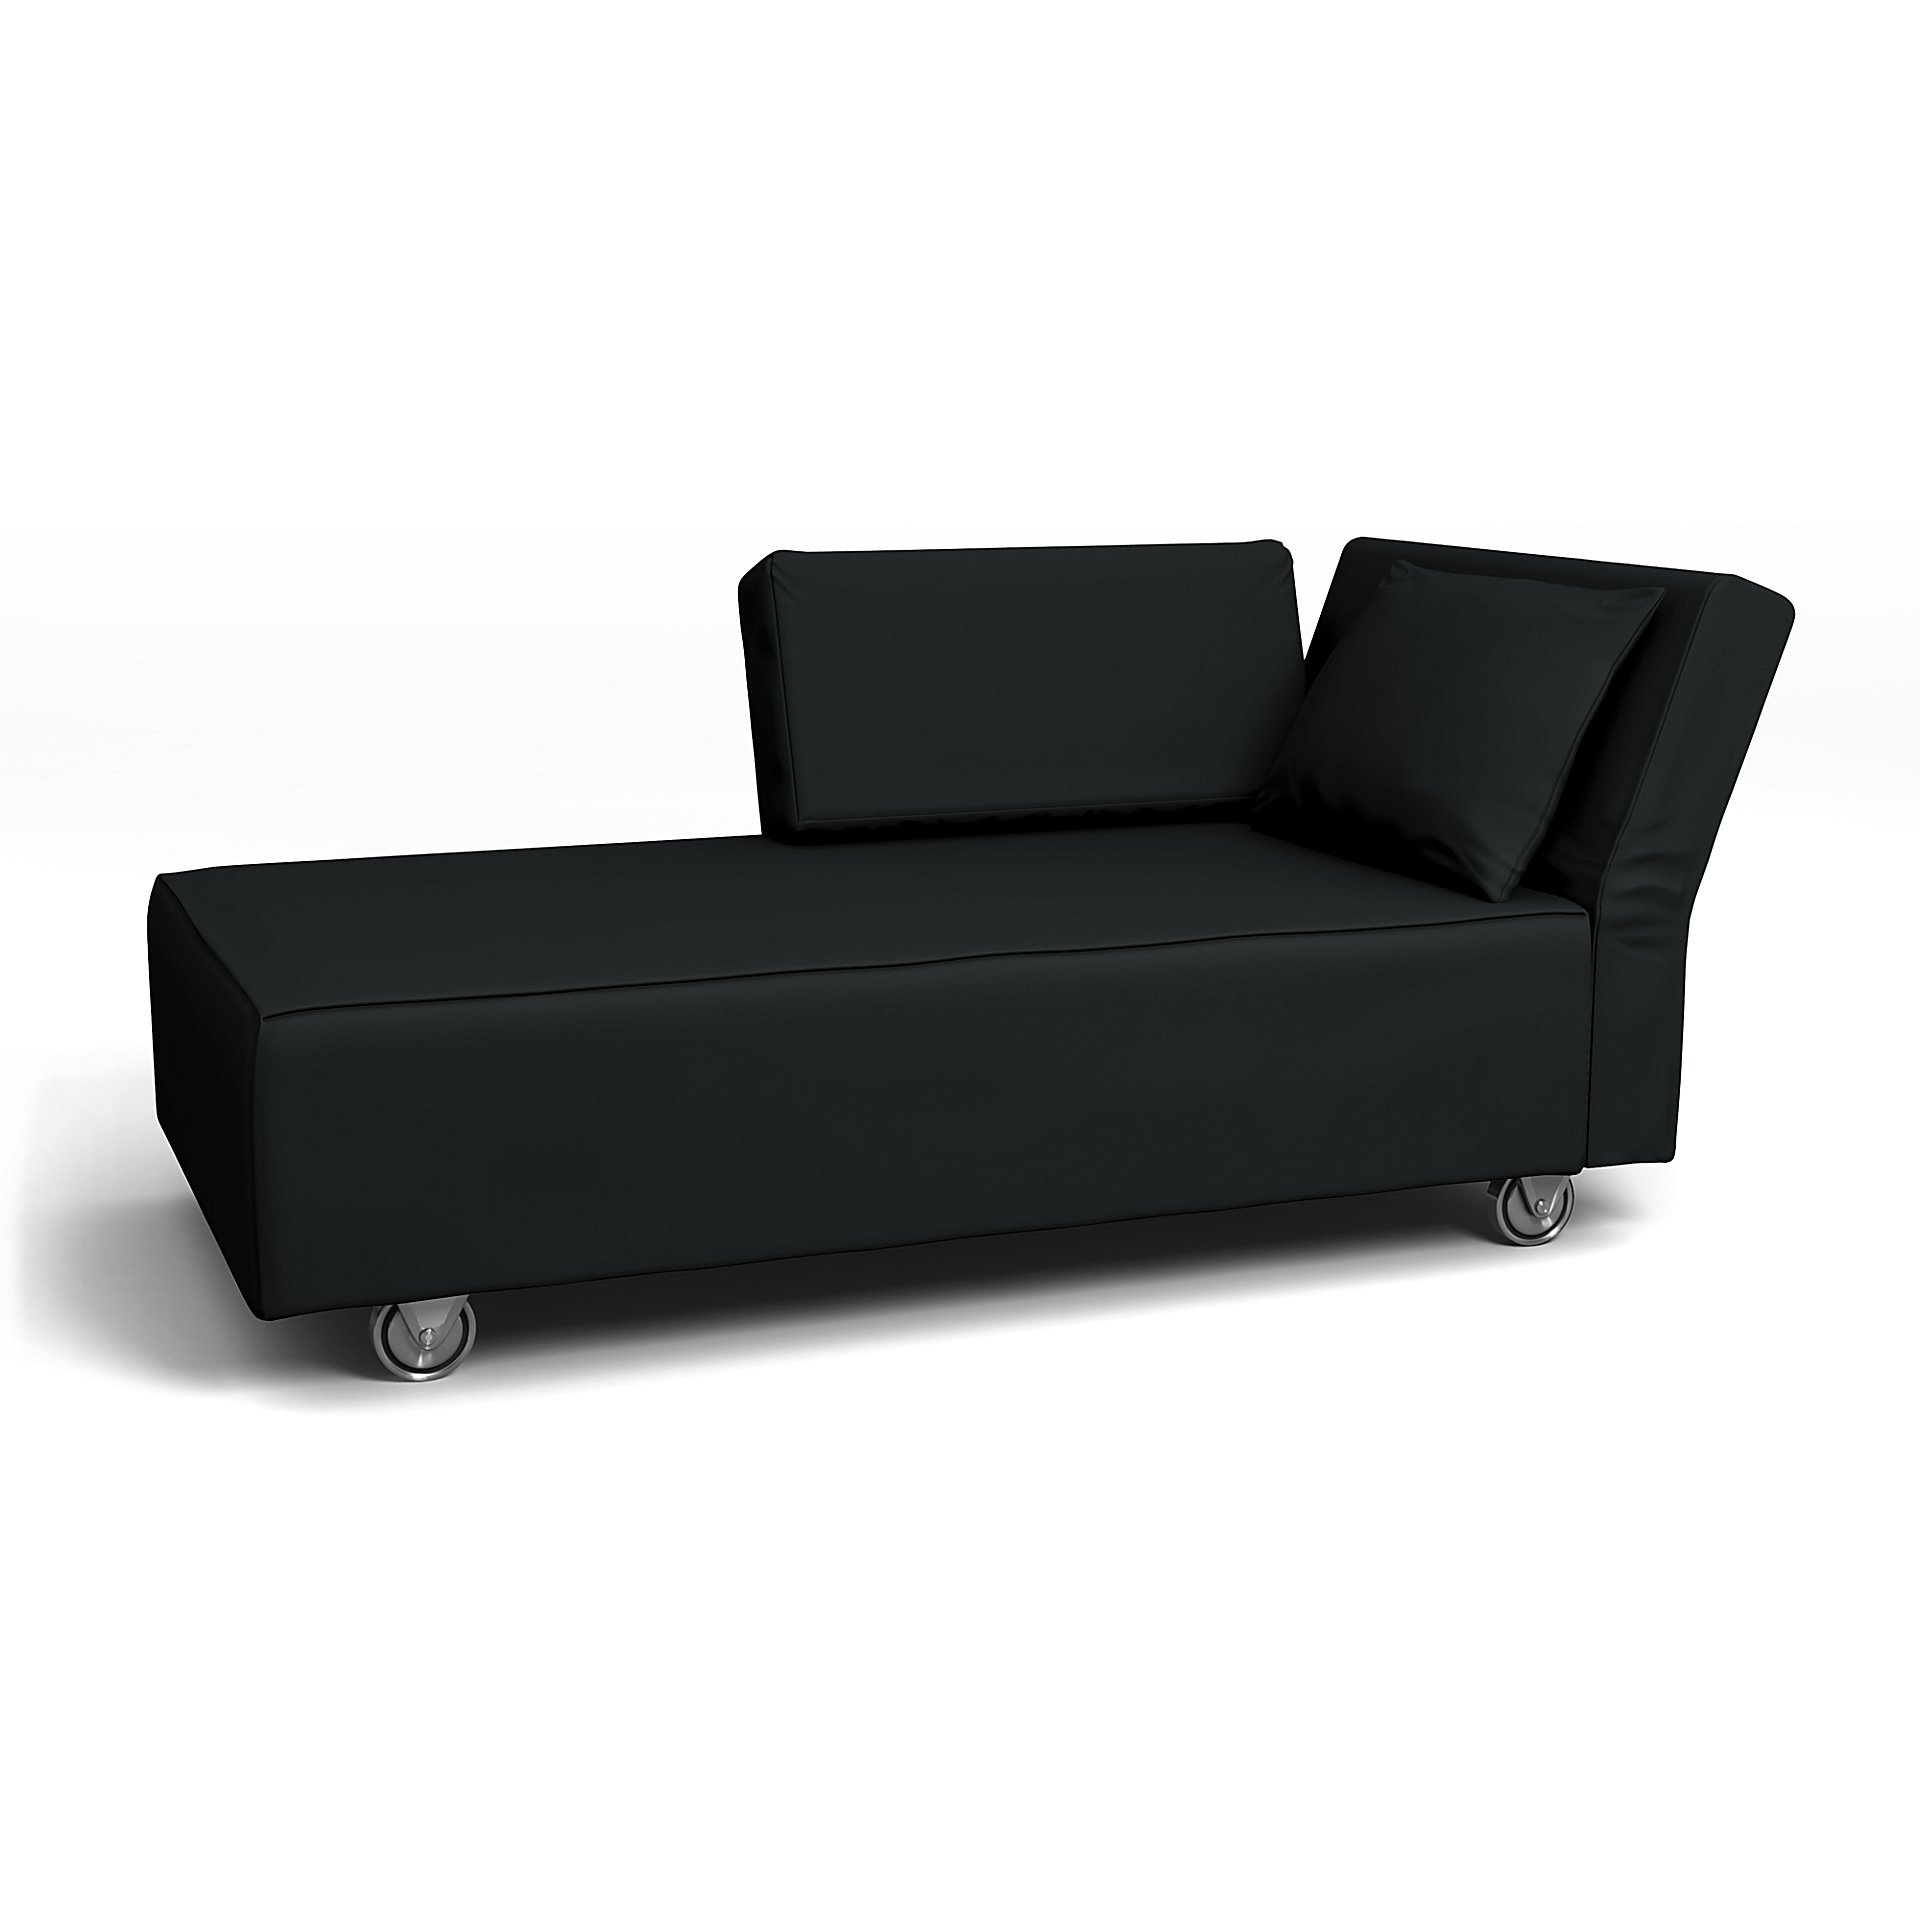 IKEA - Falsterbo Chaise with Right Armrest Cover, Jet Black, Cotton - Bemz